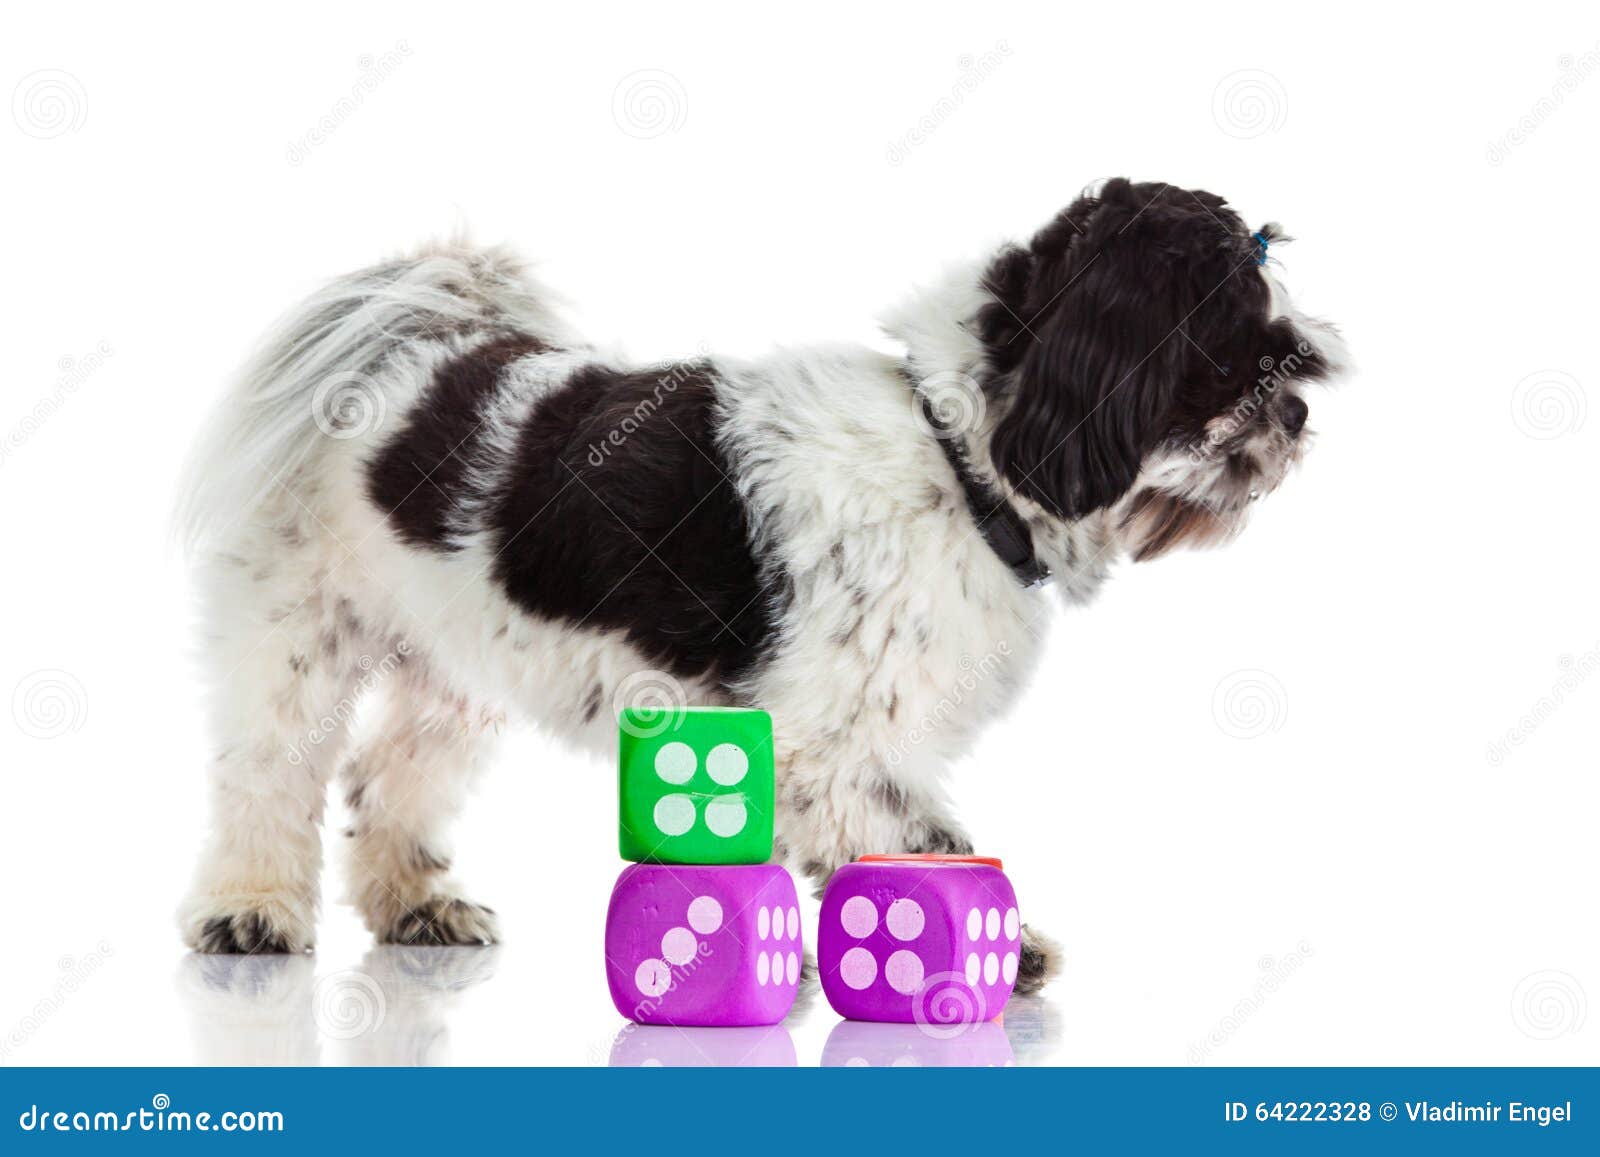 dog with dices  on white background